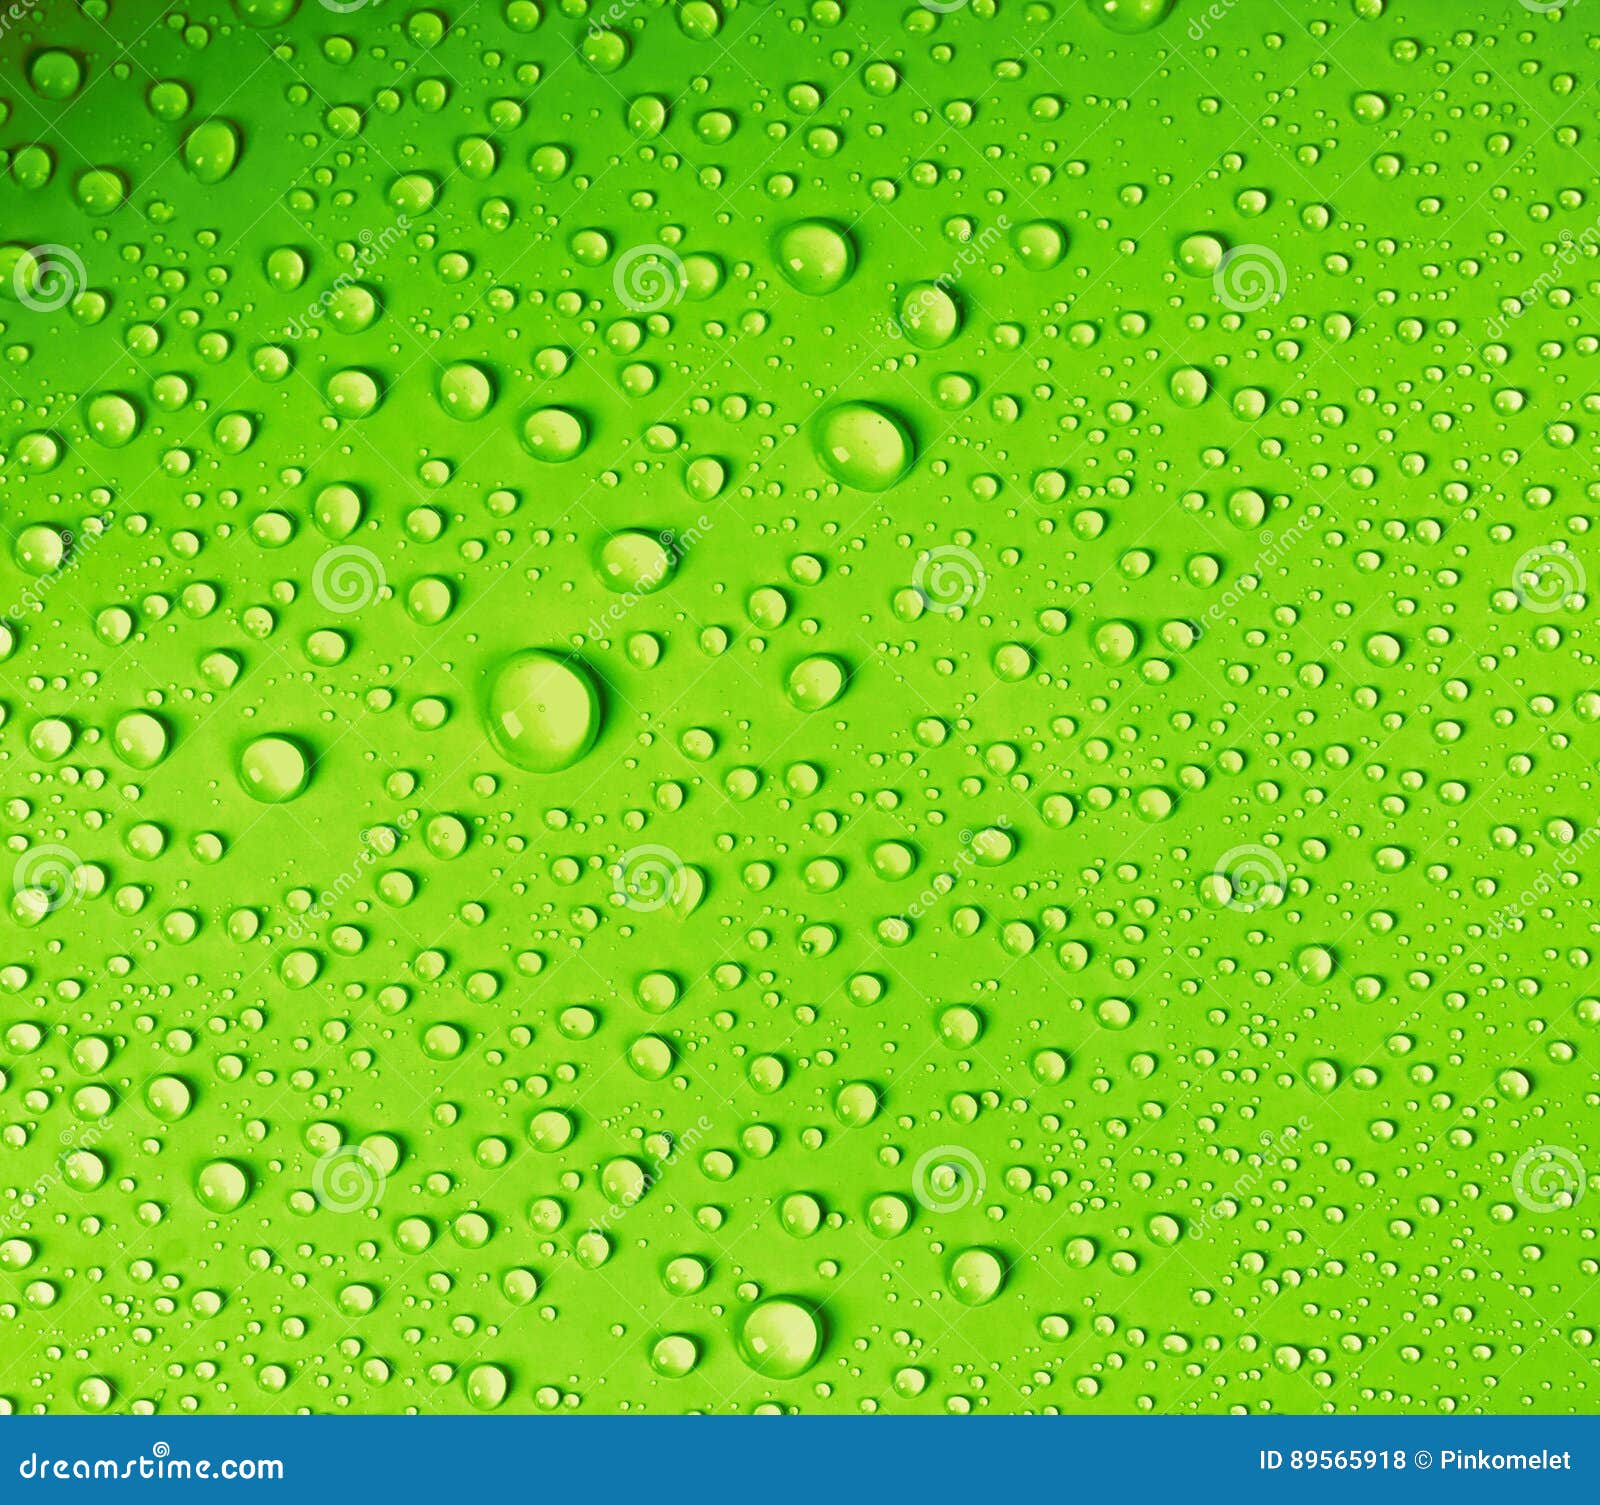 Water Drop on Fresh Light Green Background Stock Photo - Image of ...